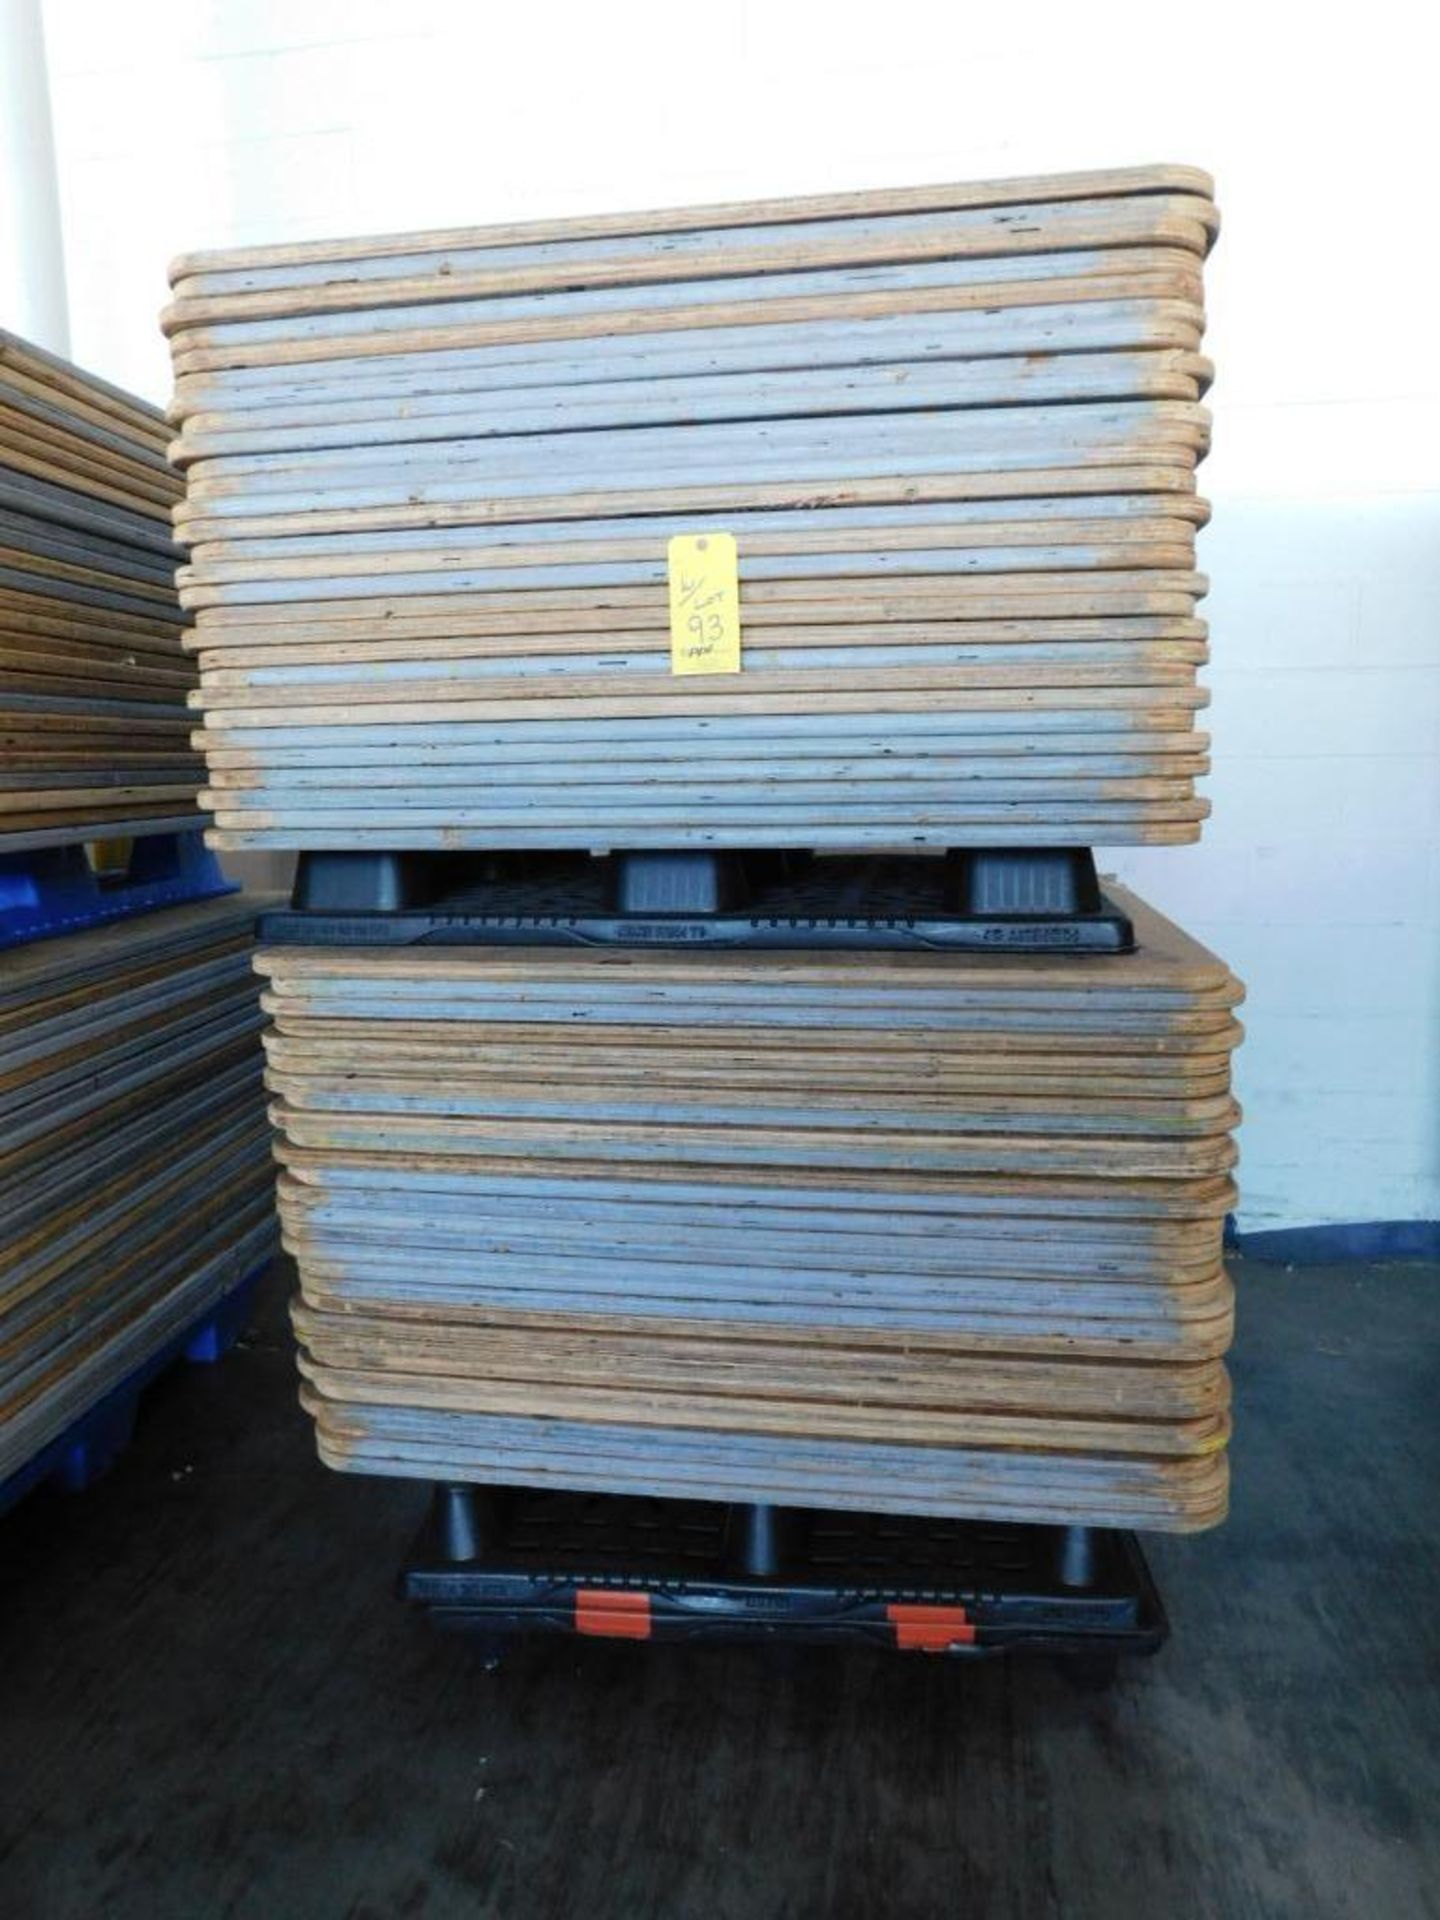 LOT: Large Quantity of 50" x 50" Wood Paper Roll Pallets on (7) Plastic Pallets (LOCATION: IN MAIL R - Image 6 of 6